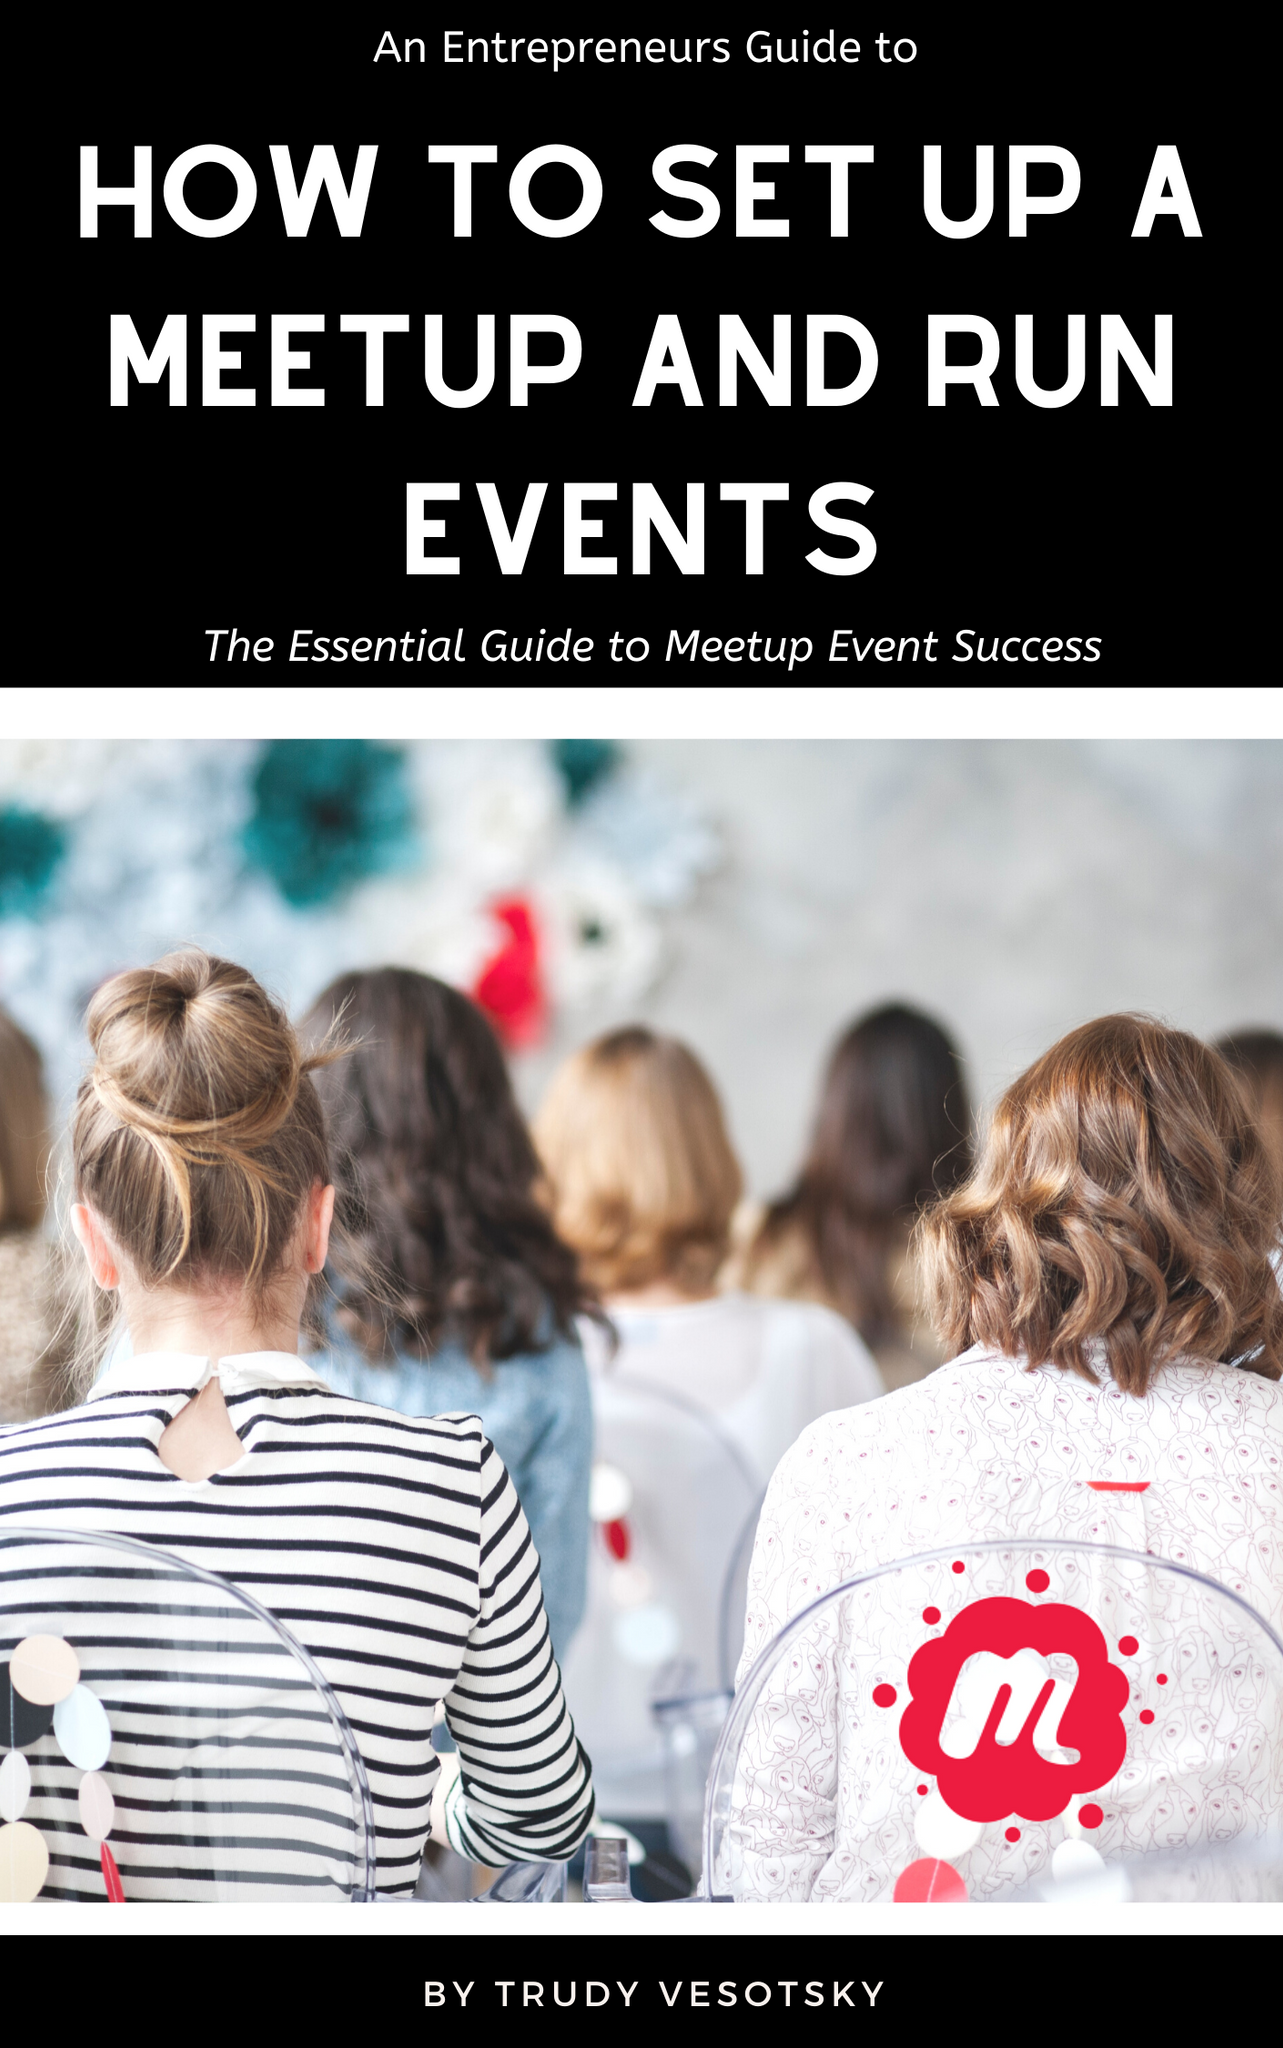 How to Set up Meetup and Run Events